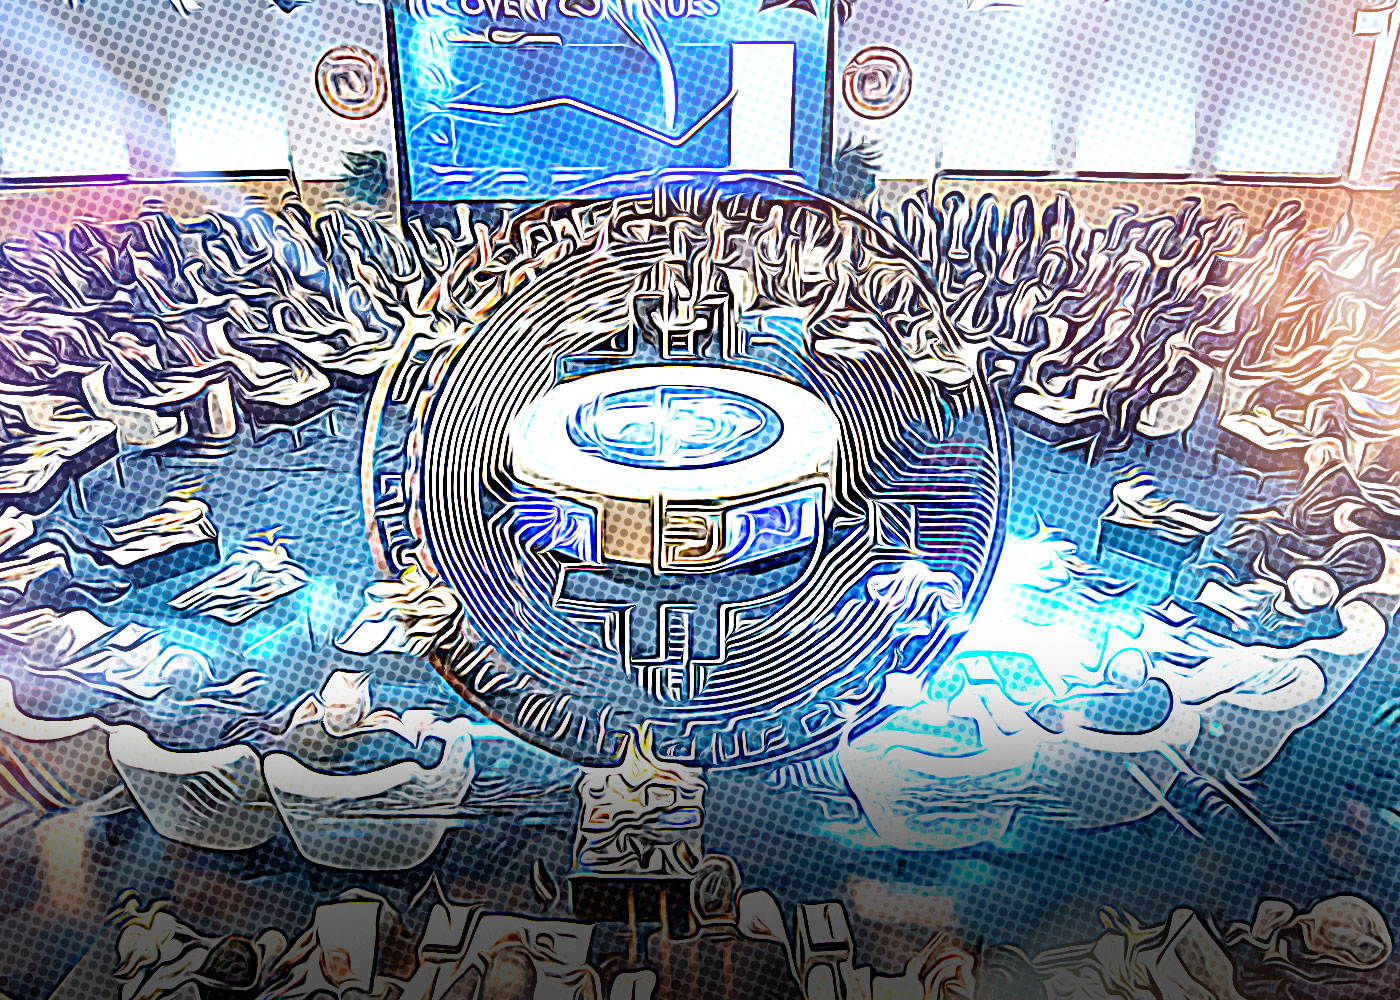 IMF Plans to Launch Cross-Border Payment Platform for Central Bank Digital Currencies2